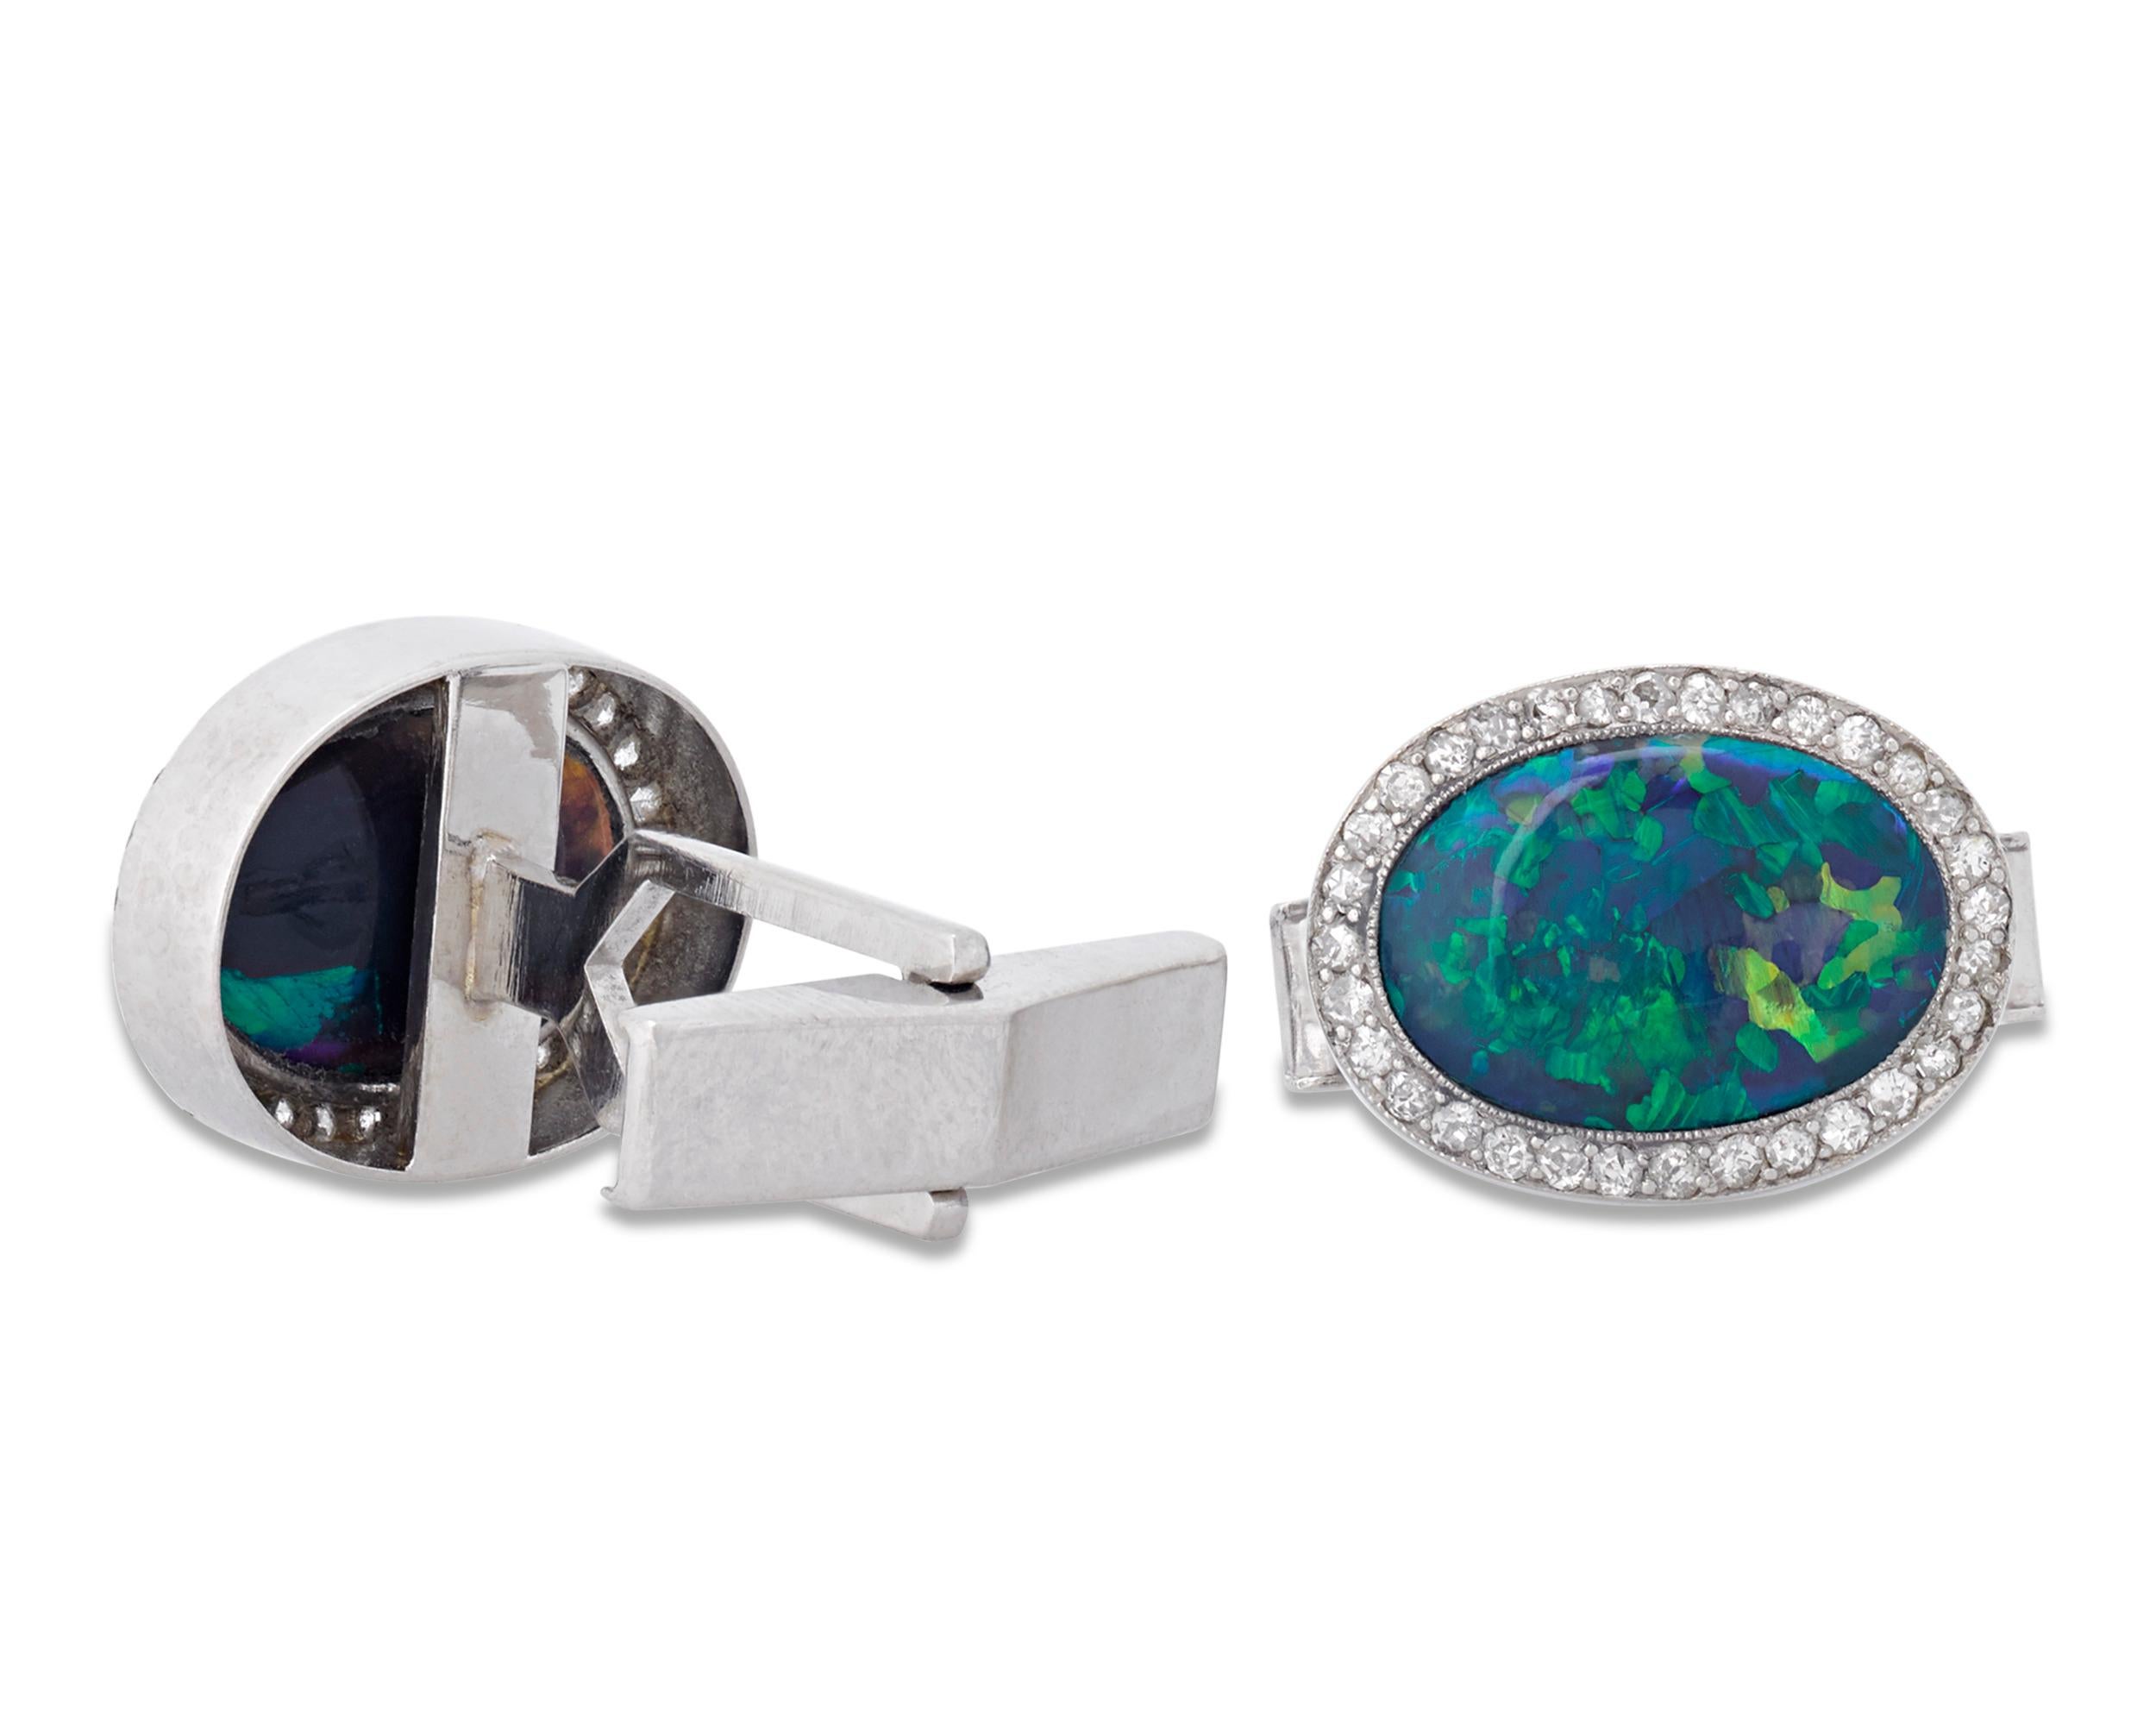 The rare black opals set in these impressive gentleman's cufflinks display an impressive range of iridescent blue and green hues. The remarkable color of the gems, which total approximately 7.00 carats, is perfectly accented by a halo of pavé-set